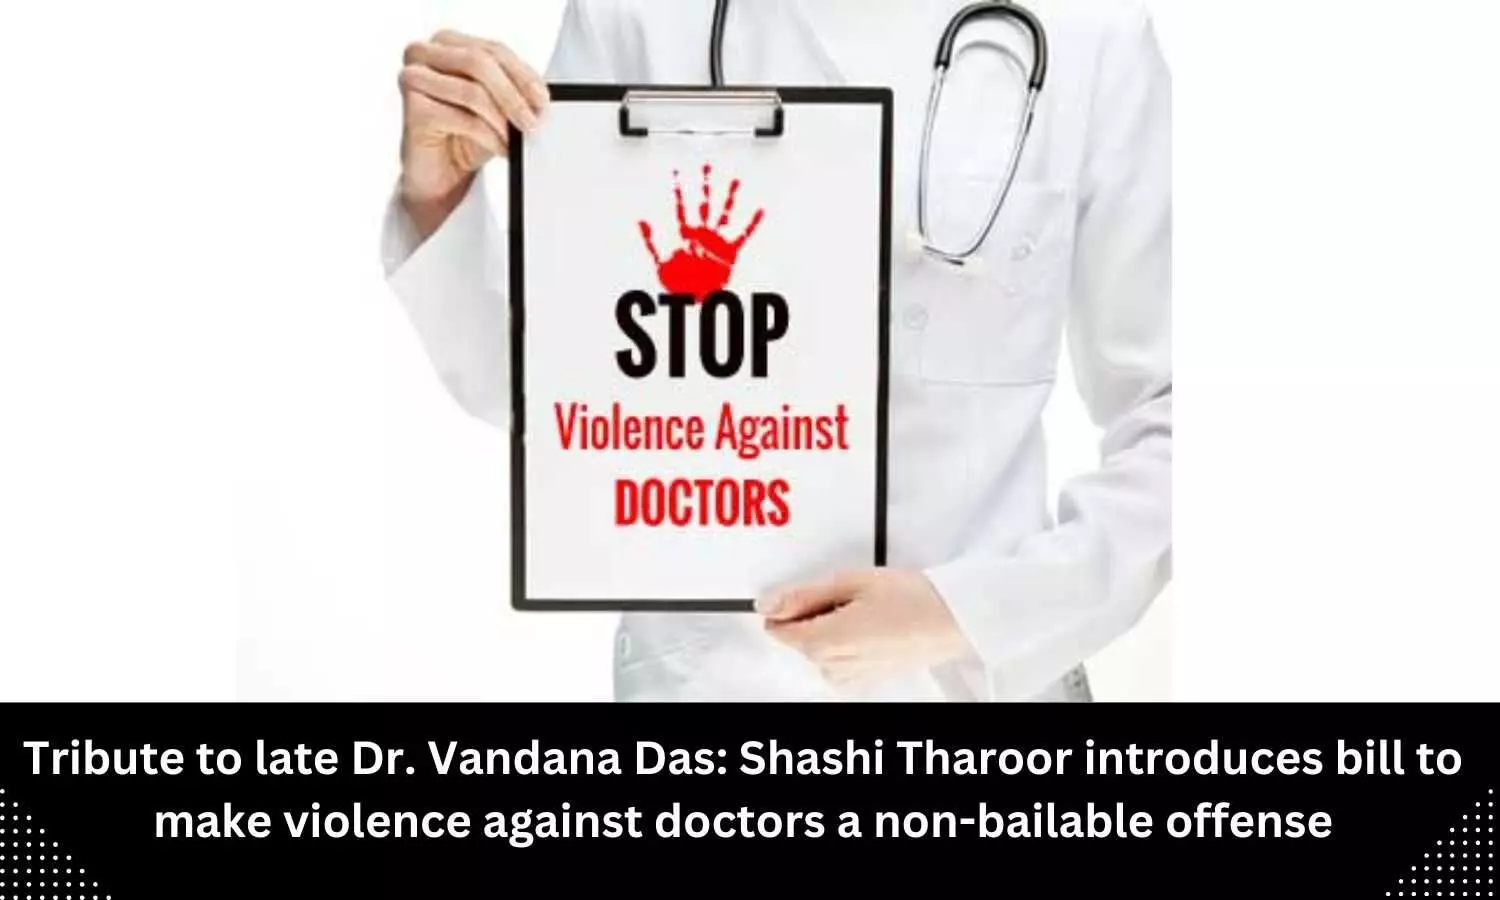 Shashi Tharoor introduces bill to protect medical personnel remembering late Dr Vandana Das